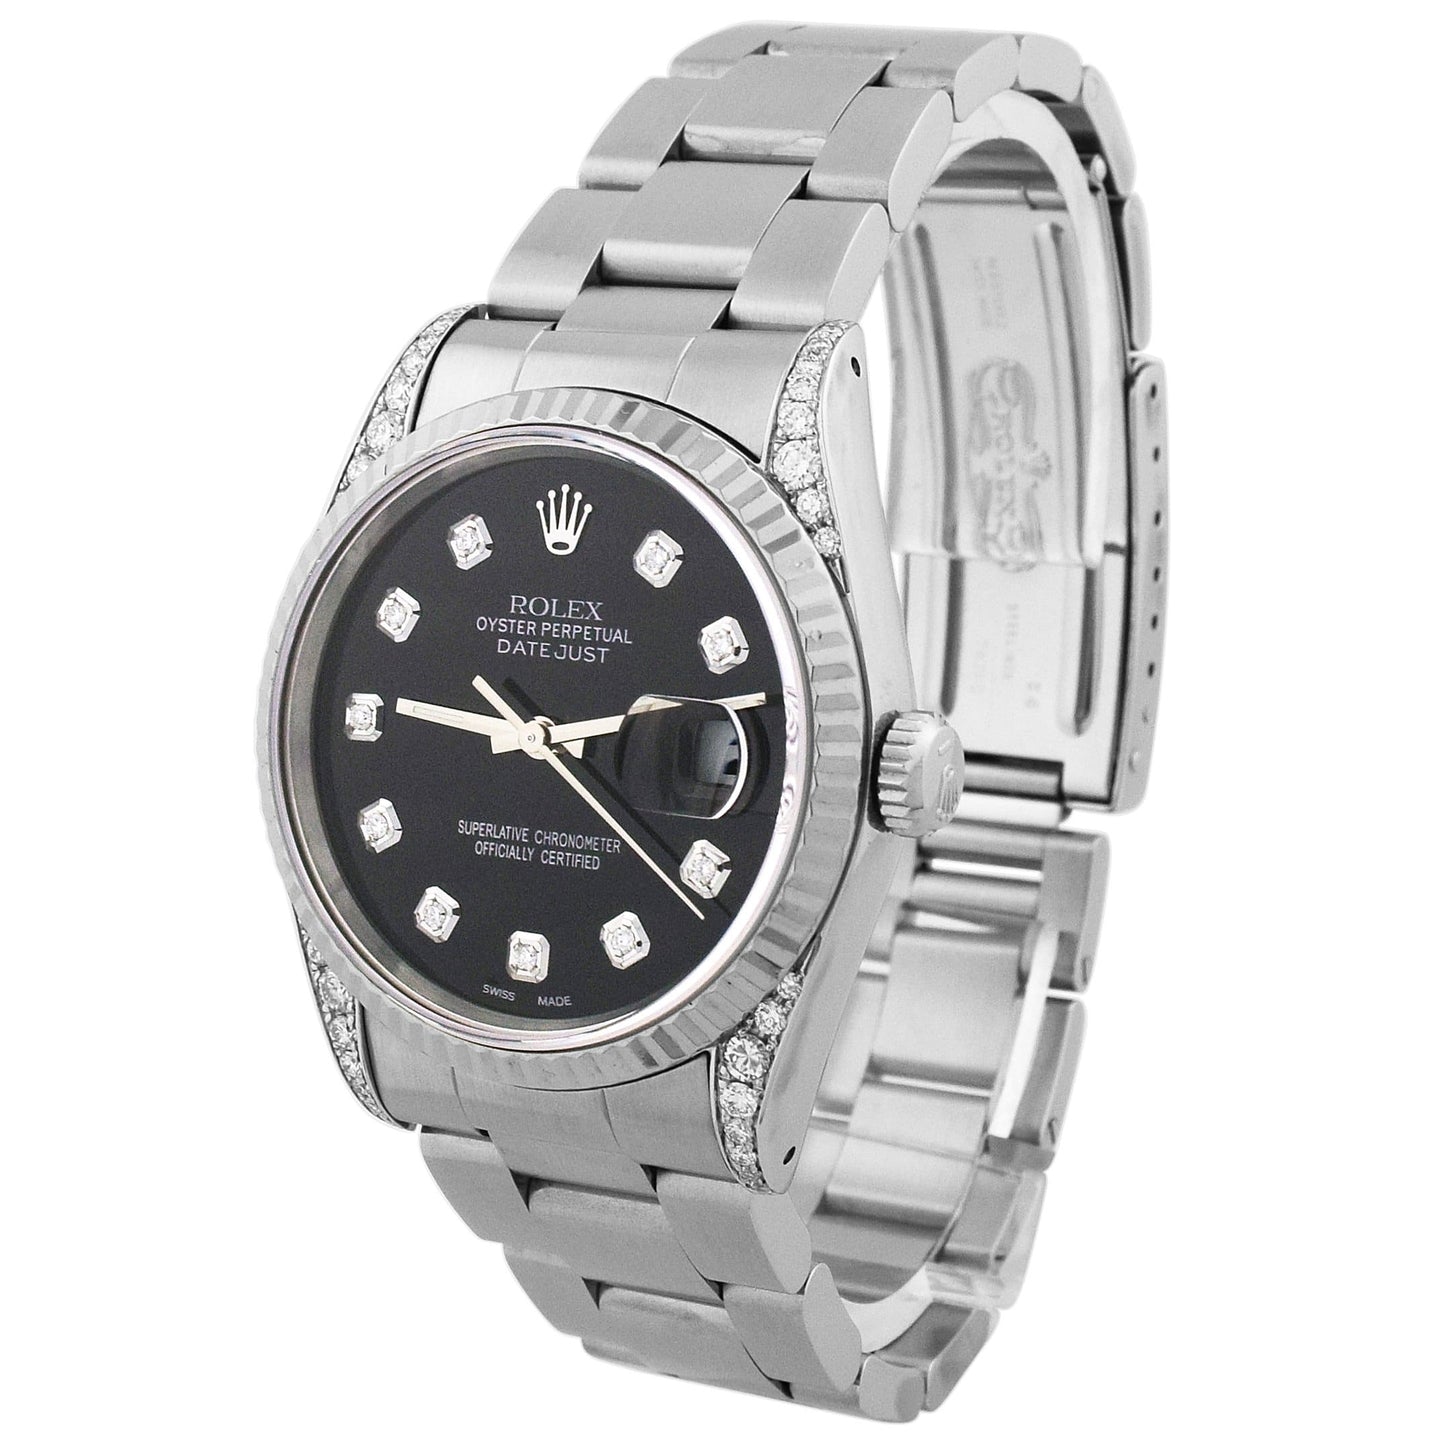 Rolex Unisex Datejust Stainless Steel 36mm Black Diamond Dot Dial Watch Reference #: 16264